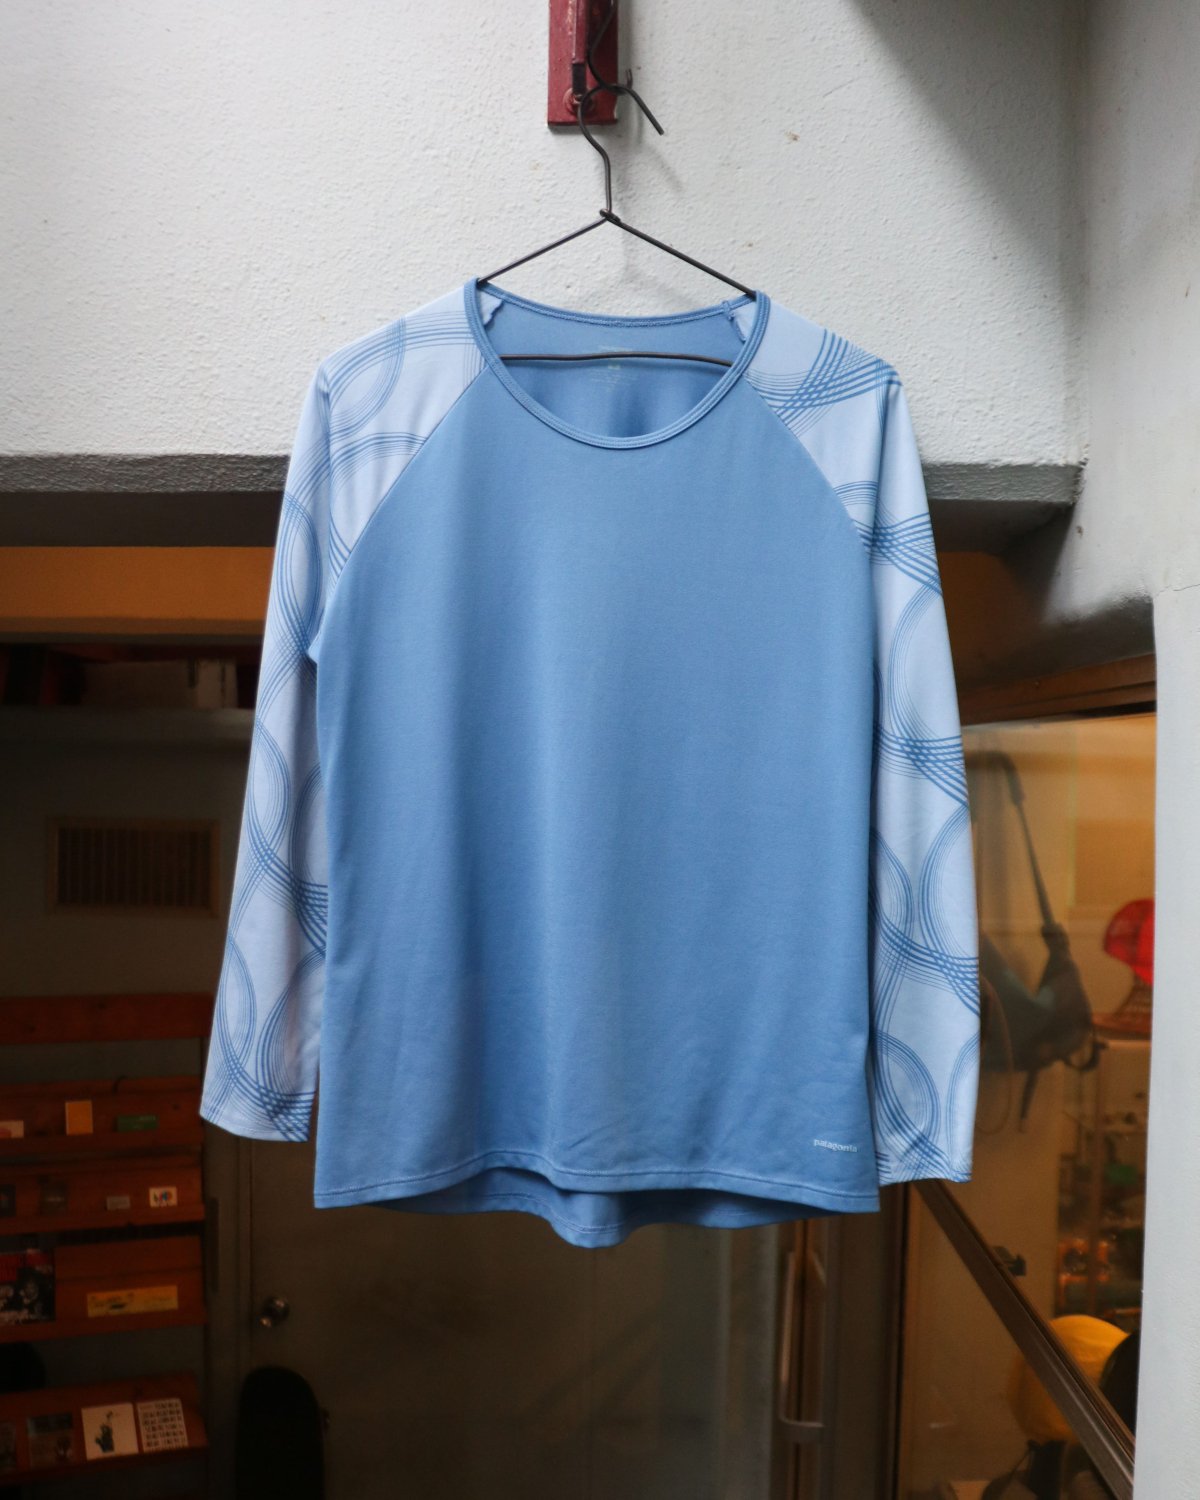 “patagonia” Design Poly Top (Made in USA)